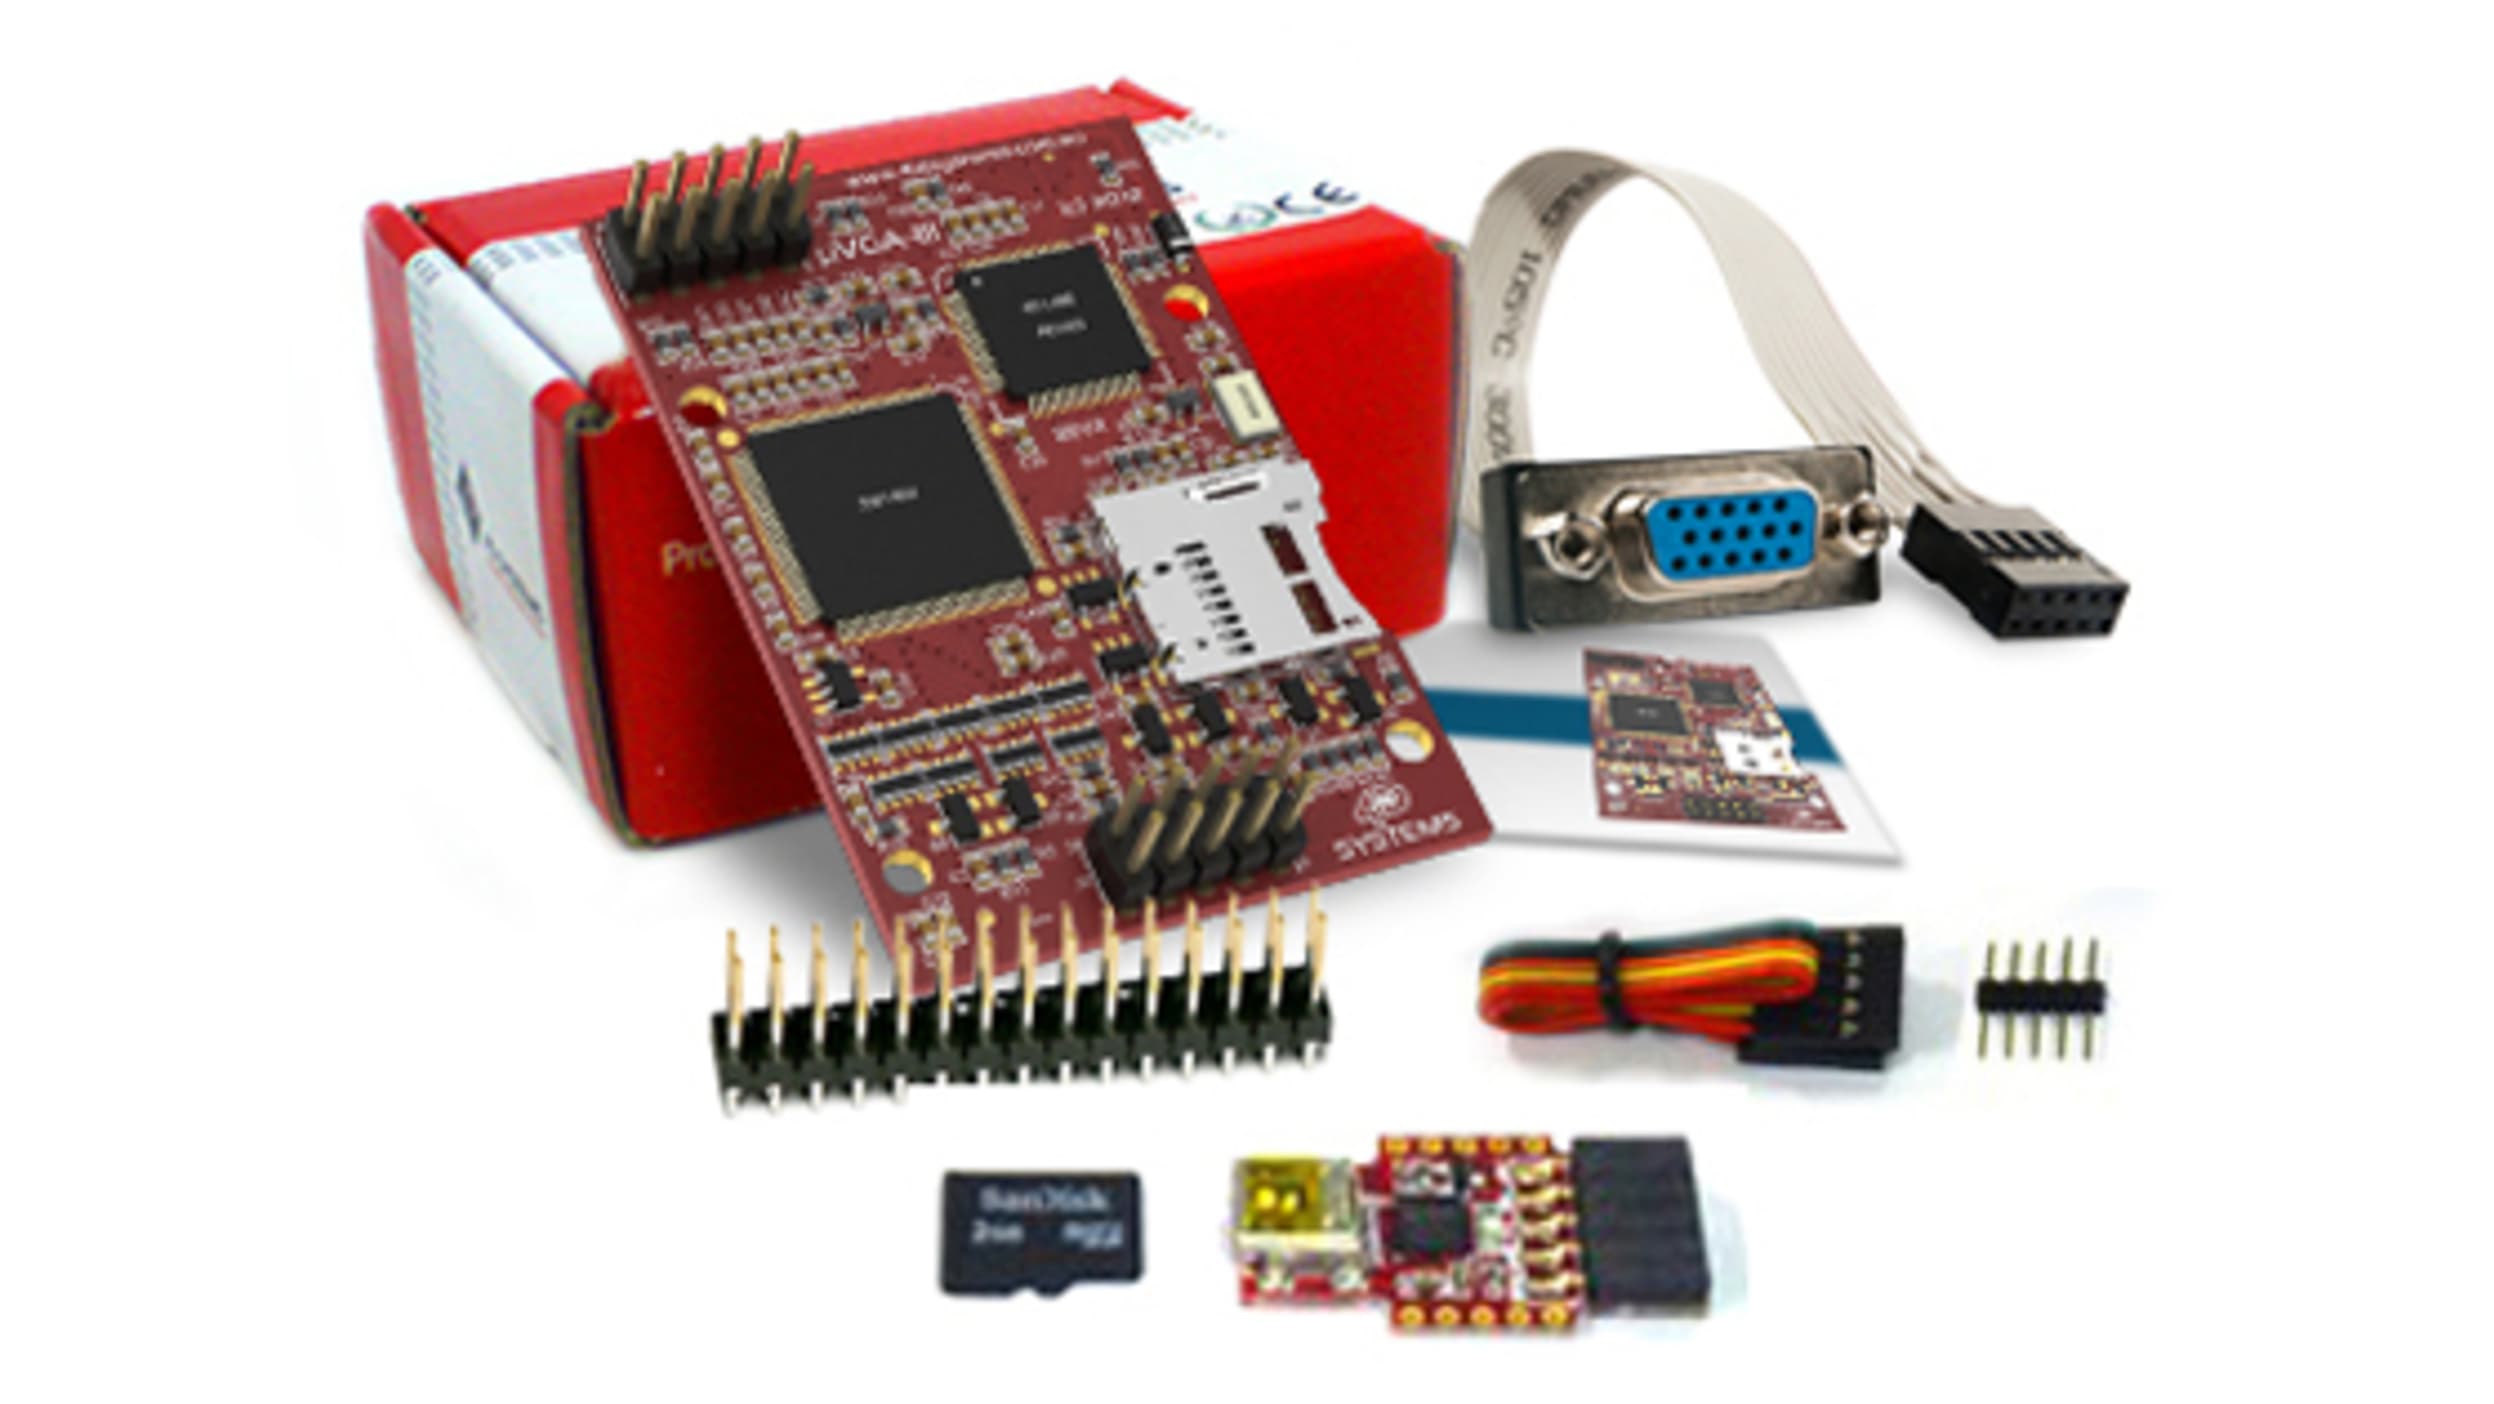 SK-uVGA-III | Graphics Display Development Kit 4D Systems | RS